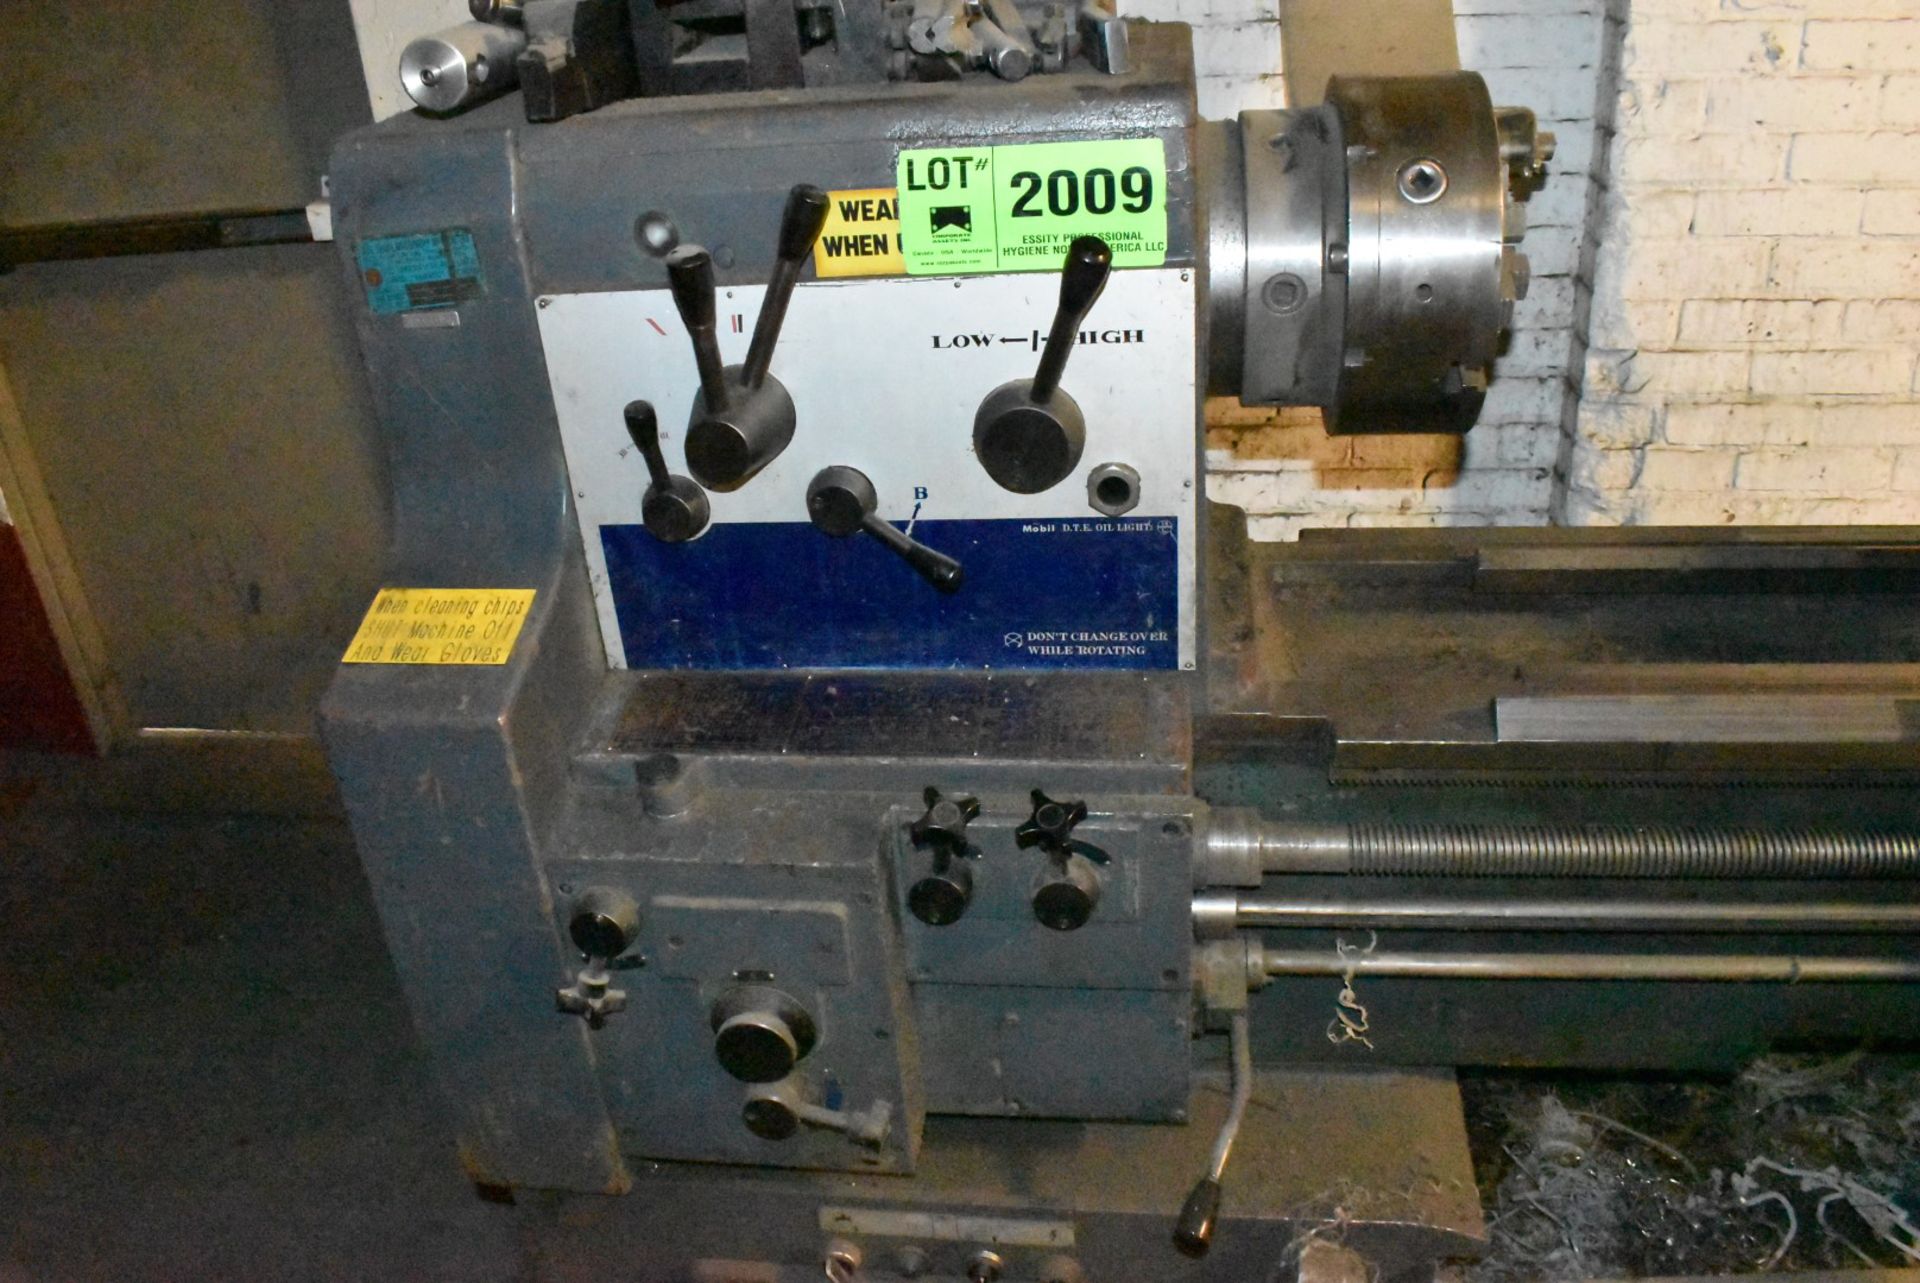 JET JE24X100 GAP BED ENGINE LATHE WITH 24" SWING OVER BED, 33" SWING IN THE GAP, 100" BETWEEN - Image 4 of 12